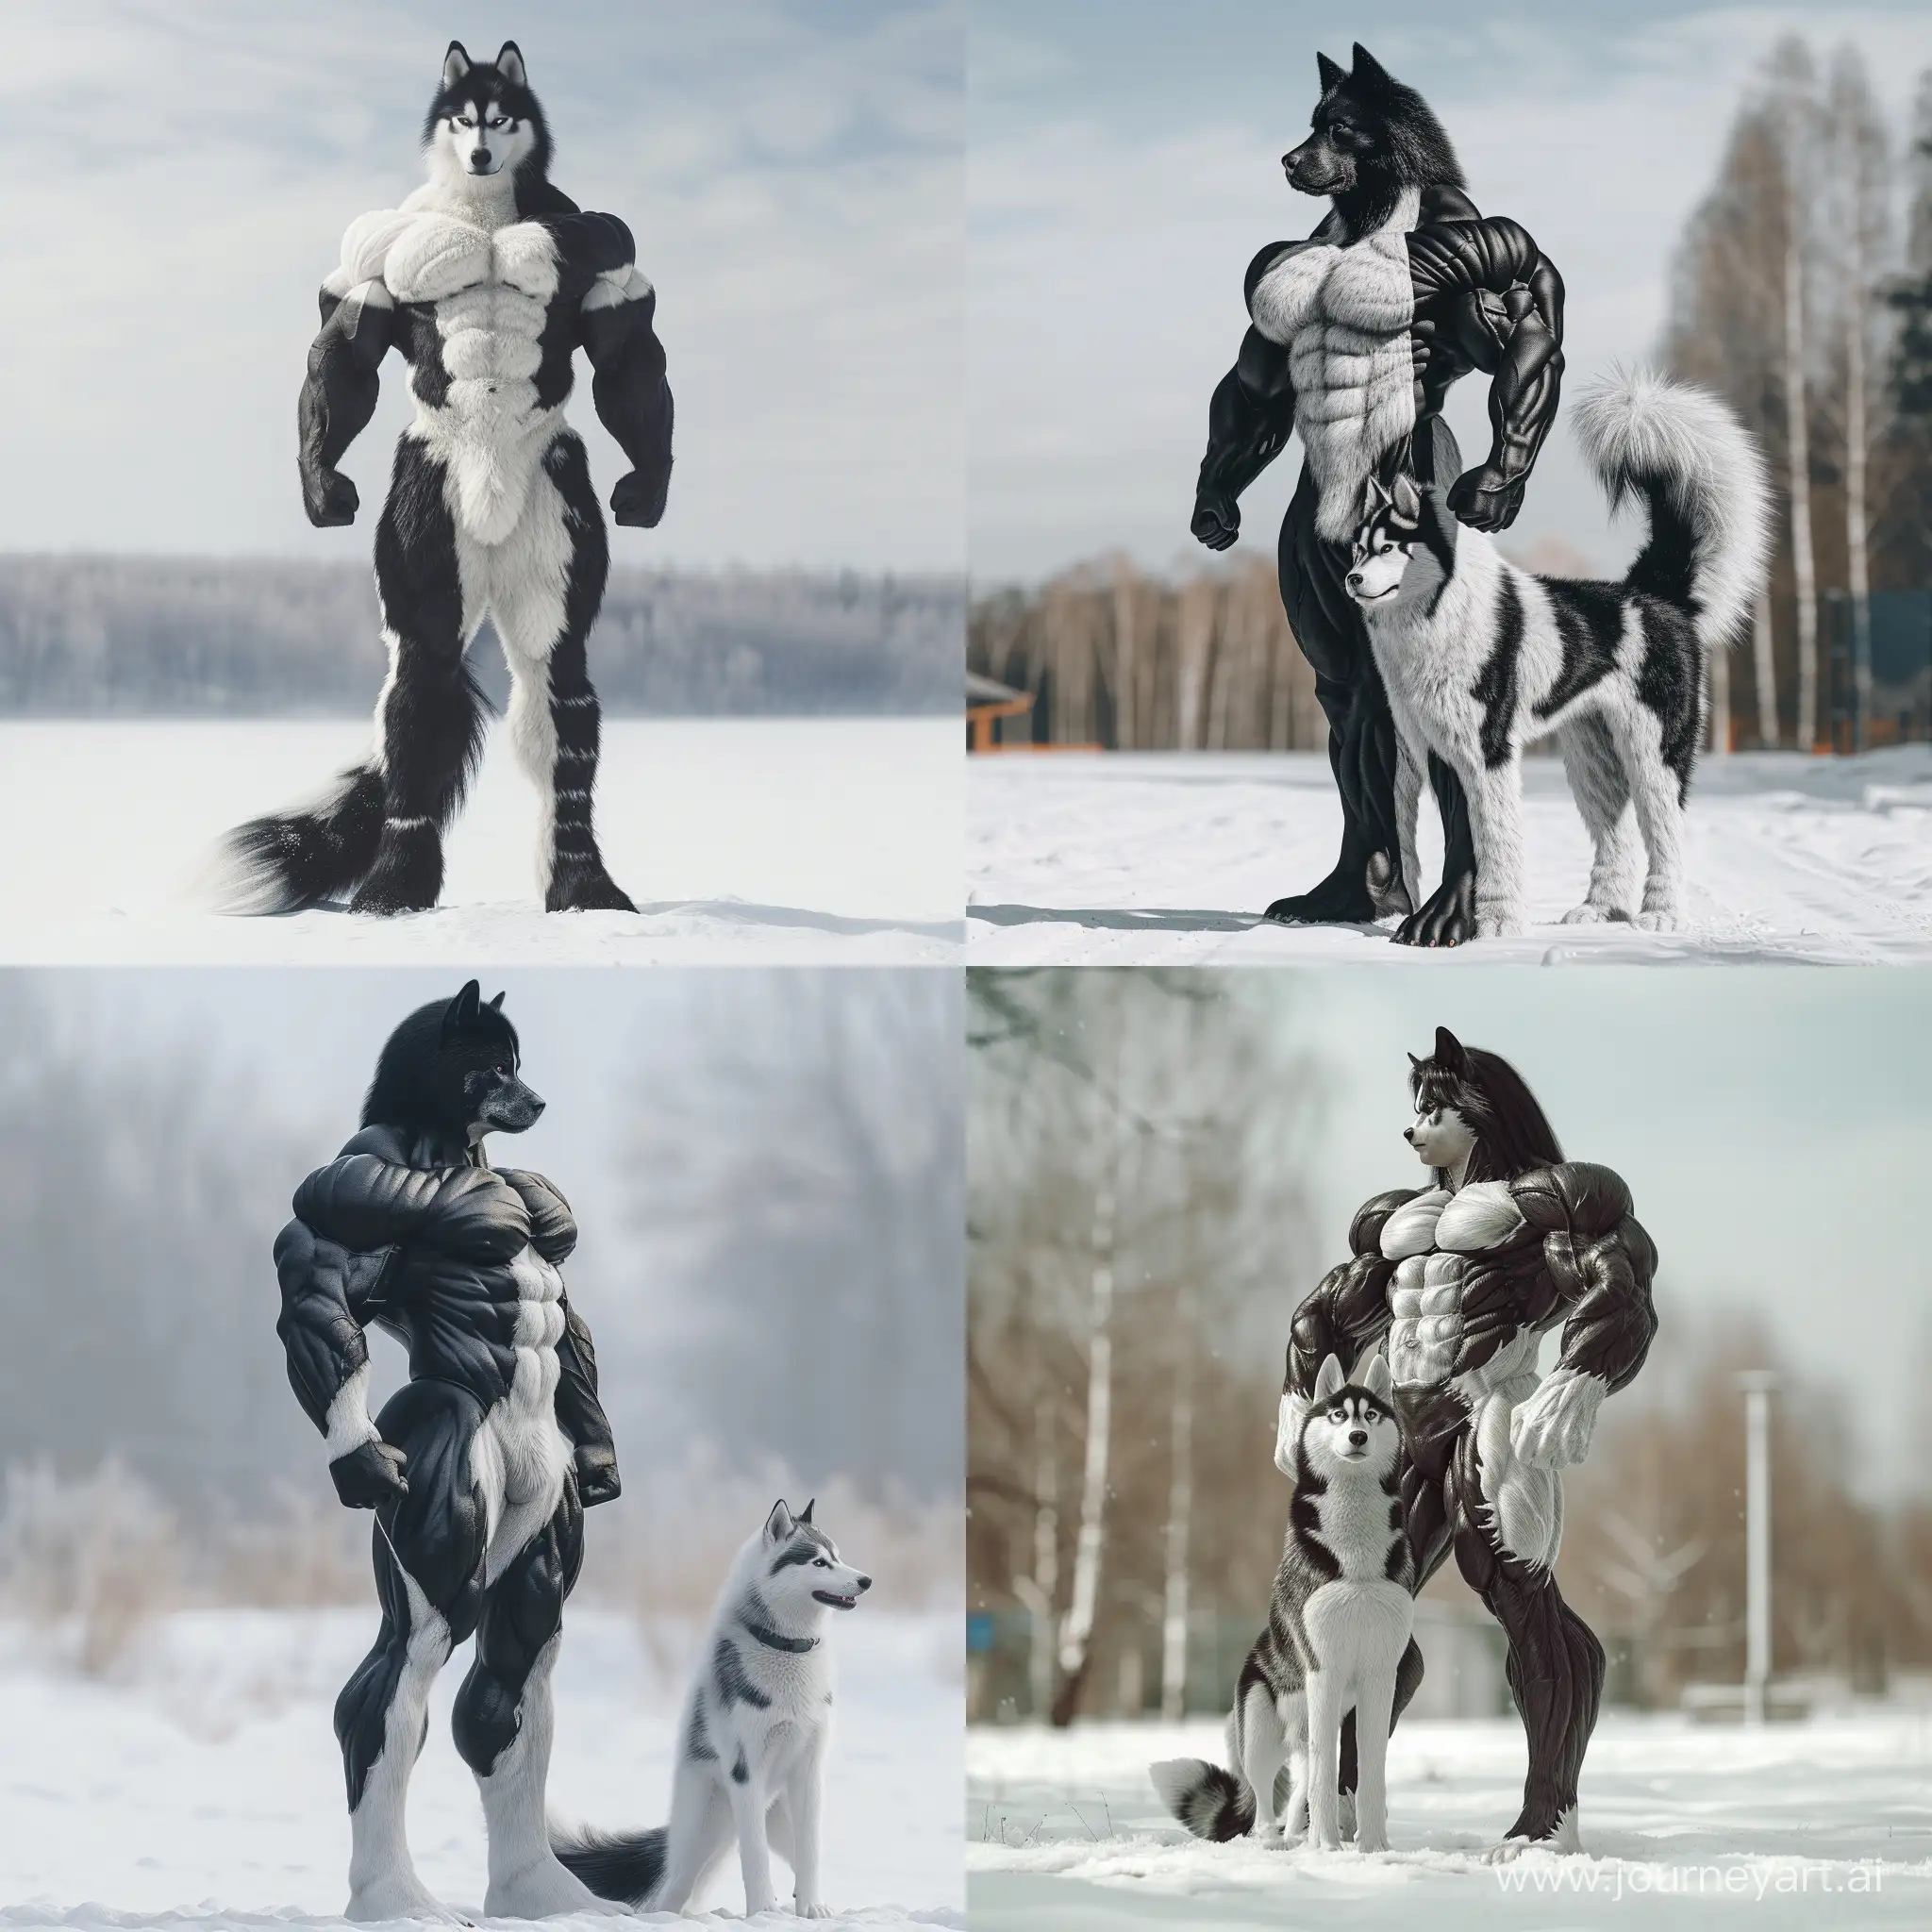 Bodybuilder with black and white furry body and the head of a Husky dog, photorealistic, in the snow, Standing tall, full body, tail